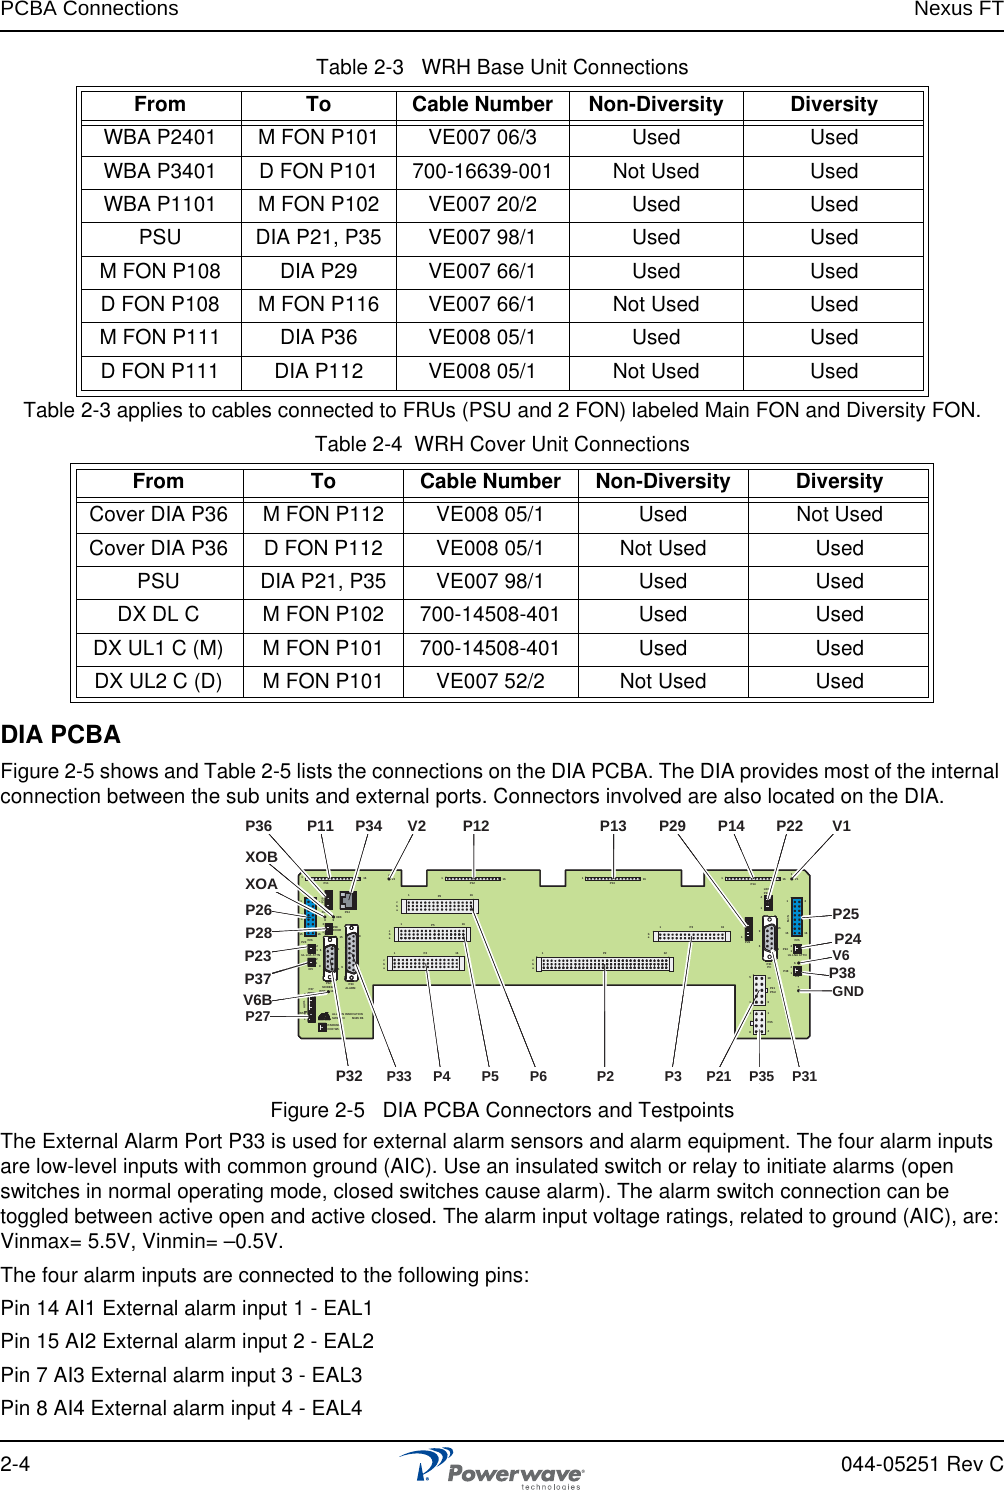 PCBA Connections Nexus FT2-4 044-05251 Rev CTable 2-3   WRH Base Unit ConnectionsTable 2-3 applies to cables connected to FRUs (PSU and 2 FON) labeled Main FON and Diversity FON.Table 2-4  WRH Cover Unit ConnectionsDIA PCBAFigure 2-5 shows and Table 2-5 lists the connections on the DIA PCBA. The DIA provides most of the internal connection between the sub units and external ports. Connectors involved are also located on the DIA. Figure 2-5   DIA PCBA Connectors and TestpointsThe External Alarm Port P33 is used for external alarm sensors and alarm equipment. The four alarm inputs are low-level inputs with common ground (AIC). Use an insulated switch or relay to initiate alarms (open switches in normal operating mode, closed switches cause alarm). The alarm switch connection can be toggled between active open and active closed. The alarm input voltage ratings, related to ground (AIC), are: Vinmax= 5.5V, Vinmin= –0.5V.The four alarm inputs are connected to the following pins:Pin 14 AI1 External alarm input 1 - EAL1Pin 15 AI2 External alarm input 2 - EAL2Pin 7 AI3 External alarm input 3 - EAL3Pin 8 AI4 External alarm input 4 - EAL4From To Cable Number Non-Diversity DiversityWBA P2401 M FON P101 VE007 06/3 Used UsedWBA P3401 D FON P101 700-16639-001 Not Used UsedWBA P1101 M FON P102 VE007 20/2 Used UsedPSU DIA P21, P35 VE007 98/1 Used UsedM FON P108 DIA P29 VE007 66/1 Used UsedD FON P108 M FON P116 VE007 66/1 Not Used UsedM FON P111 DIA P36 VE008 05/1 Used UsedD FON P111 DIA P112 VE008 05/1 Not Used UsedFrom To Cable Number Non-Diversity DiversityCover DIA P36 M FON P112 VE008 05/1 Used Not UsedCover DIA P36 D FON P112 VE008 05/1 Not Used UsedPSU DIA P21, P35 VE007 98/1 Used UsedDX DL C M FON P102 700-14508-401 Used UsedDX UL1 C (M) M FON P101 700-14508-401 Used UsedDX UL2 C (D) M FON P101 VE007 52/2 Not Used UsedALLGON INNO VATIONSWEDEN         M105 R61PARKINGFOR W5W58P27 W6B 101P33ALARMP23UL LNA ATT NP32MODEMAUX1P28DOOR596111611M-&gt;SP11P348915P2615 16S-&gt;M12389P365X0AX0B2V2 116P12 P13111161616P4P5P6cbacbacbacba1P2321ba116P316 116P141V111111461156915216124585P35P21PSU610P31PCP29P24P25GND76V6UL LNA ATTNLEDP2212V6BP26XOAXOBP28P4 P5 P6 P2 P3 P31 P21  P35 P33P32P11 P12 P13 V1P14 P22P29P34 V2P36V6GNDP25P24P27P2312P37DIV12P38DIVP38ALLGON INNO VATIONSWEDEN         M105 R61PARKINGFOR W5W58P27 W6B 101P33ALARMP23UL LNA ATT NP32MODEMAUX1P28DOOR596111611M-&gt;SP11P348915P2615 16S-&gt;M12389P365X0AX0B2V2 116P12 P13111161616P4P5P6cbacbacbacba1P2321ba116P316 116P141V111111461156915216124585P35P21PSU610P31PCP29P24P25GND76V6UL LNA ATTNLEDP2212V6BP26XOAXOBP28P4 P5 P6 P2 P3 P31 P21  P35 P33P32P11 P12 P13 V1P14 P22P29P34 V2P36V6GNDP25P24P27P2312P37DIV12P38DIVP38